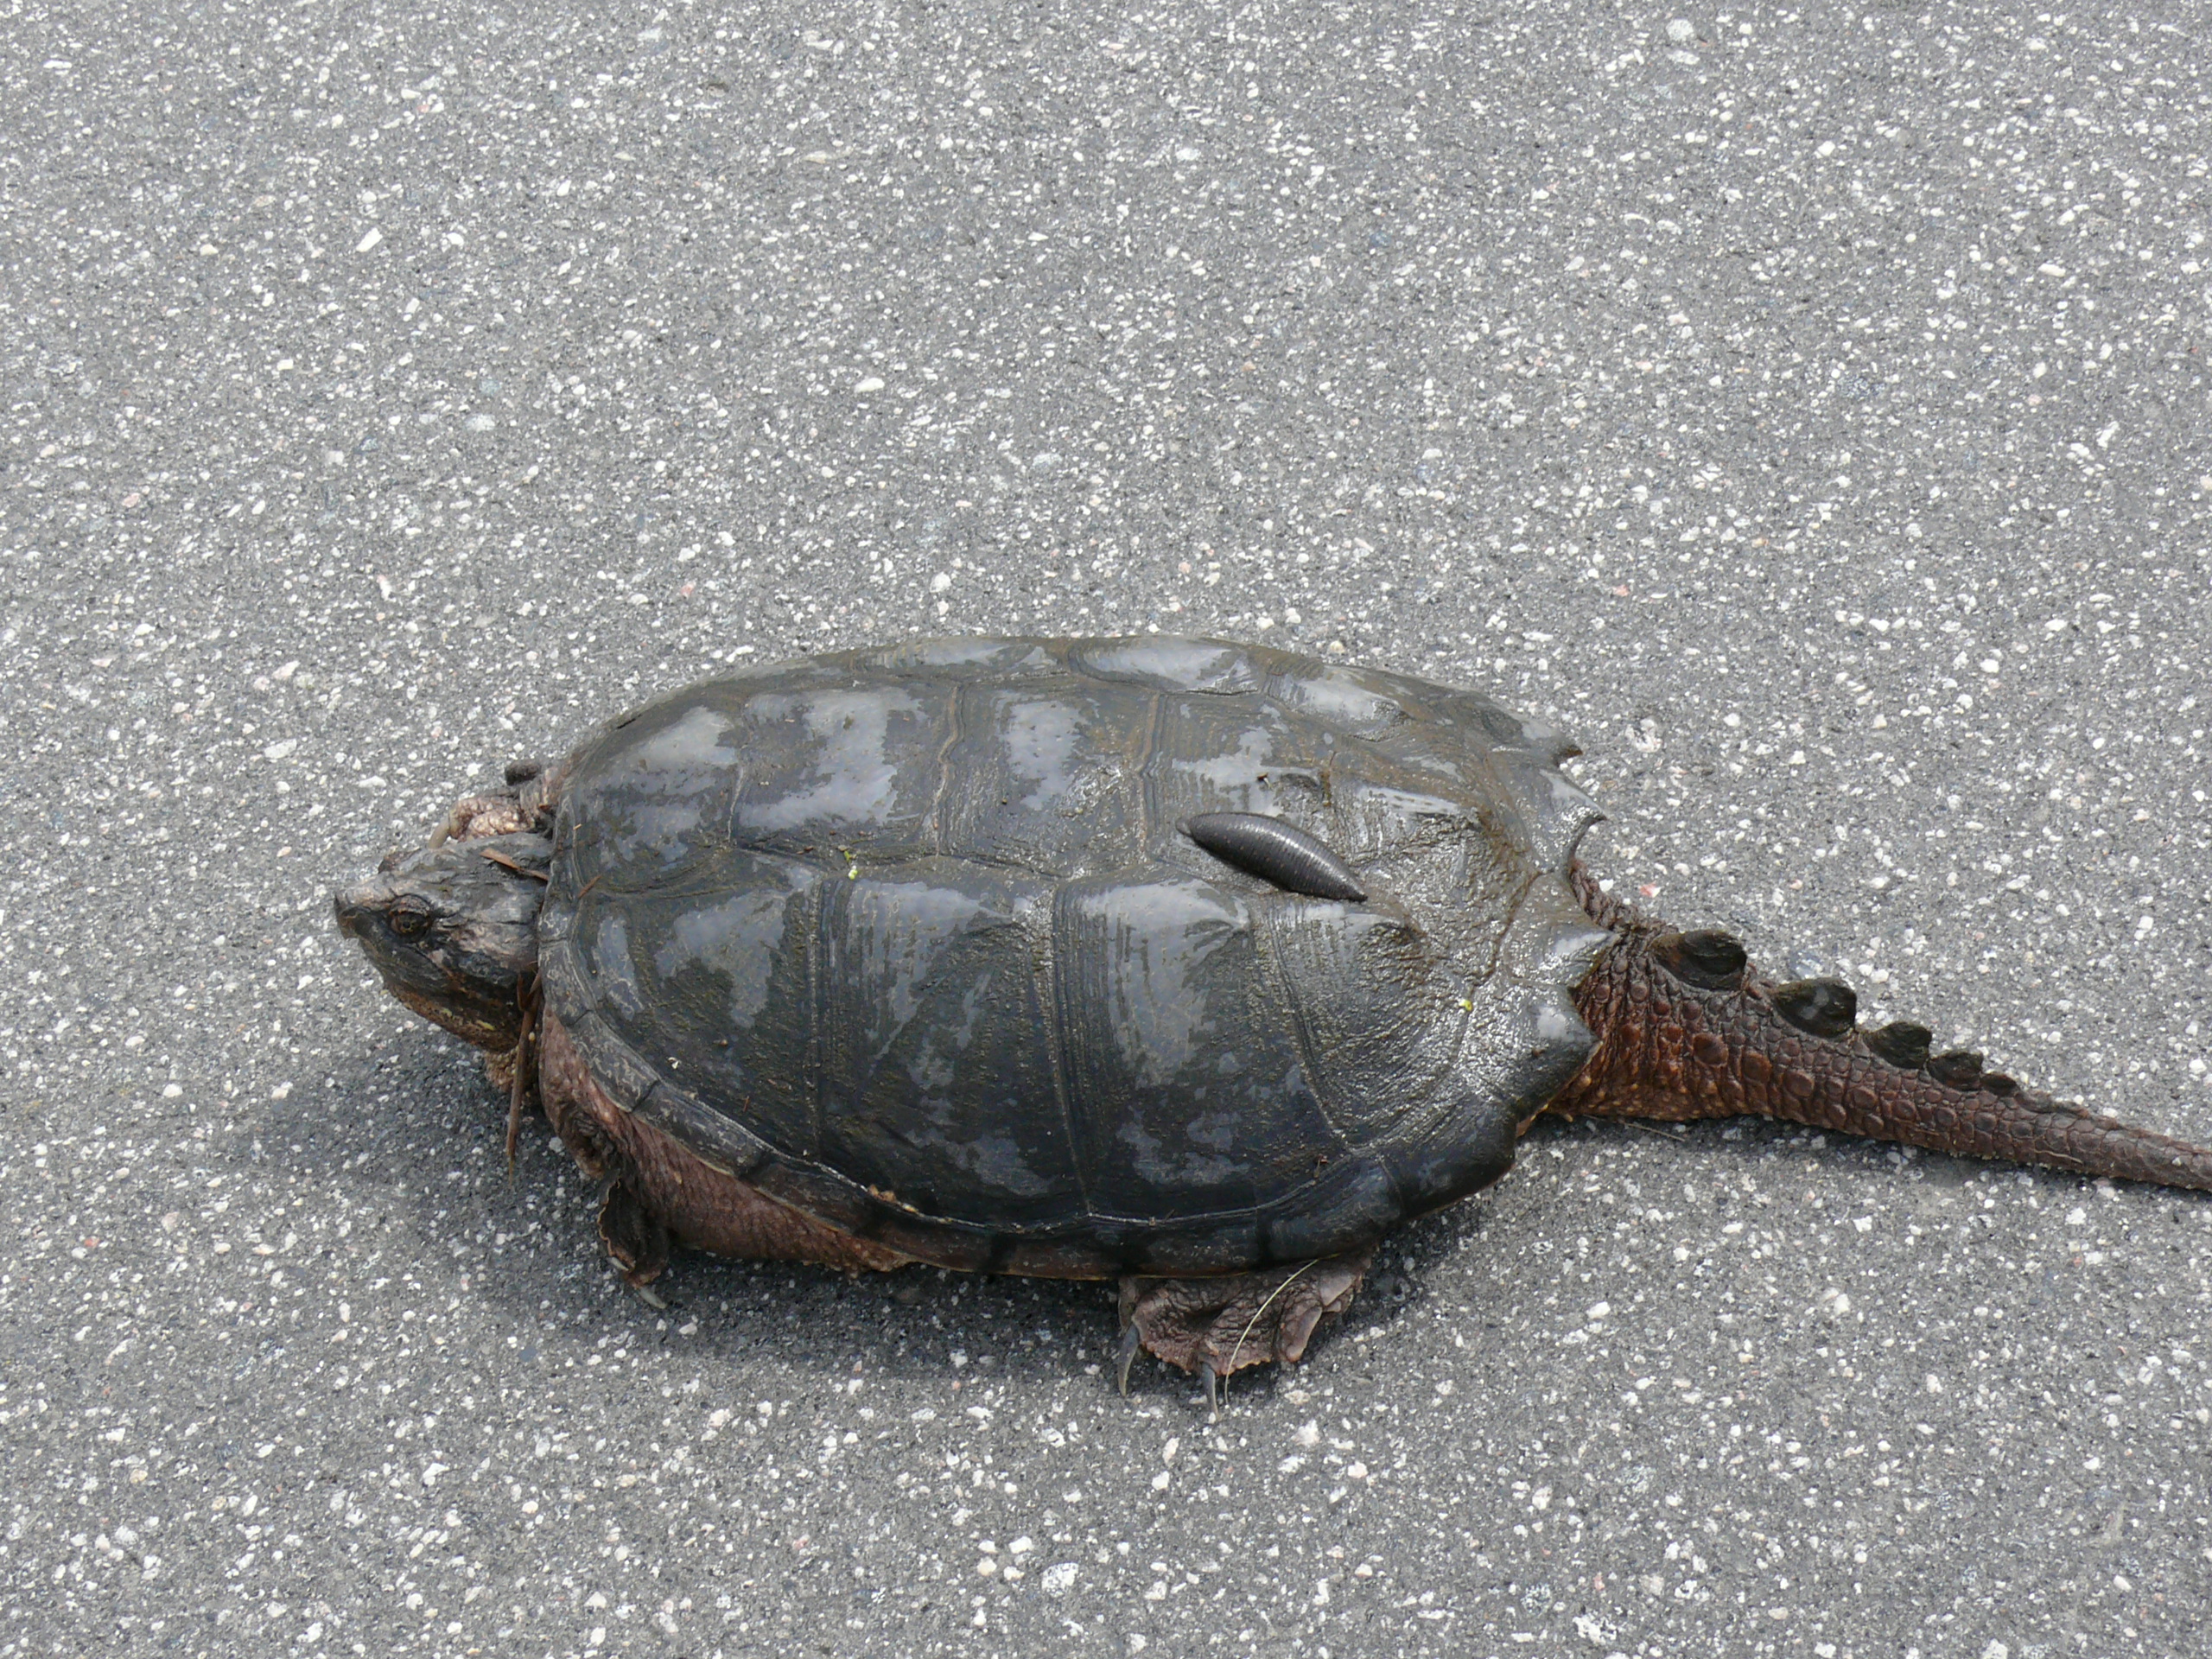 Why does the turtle cross the road?